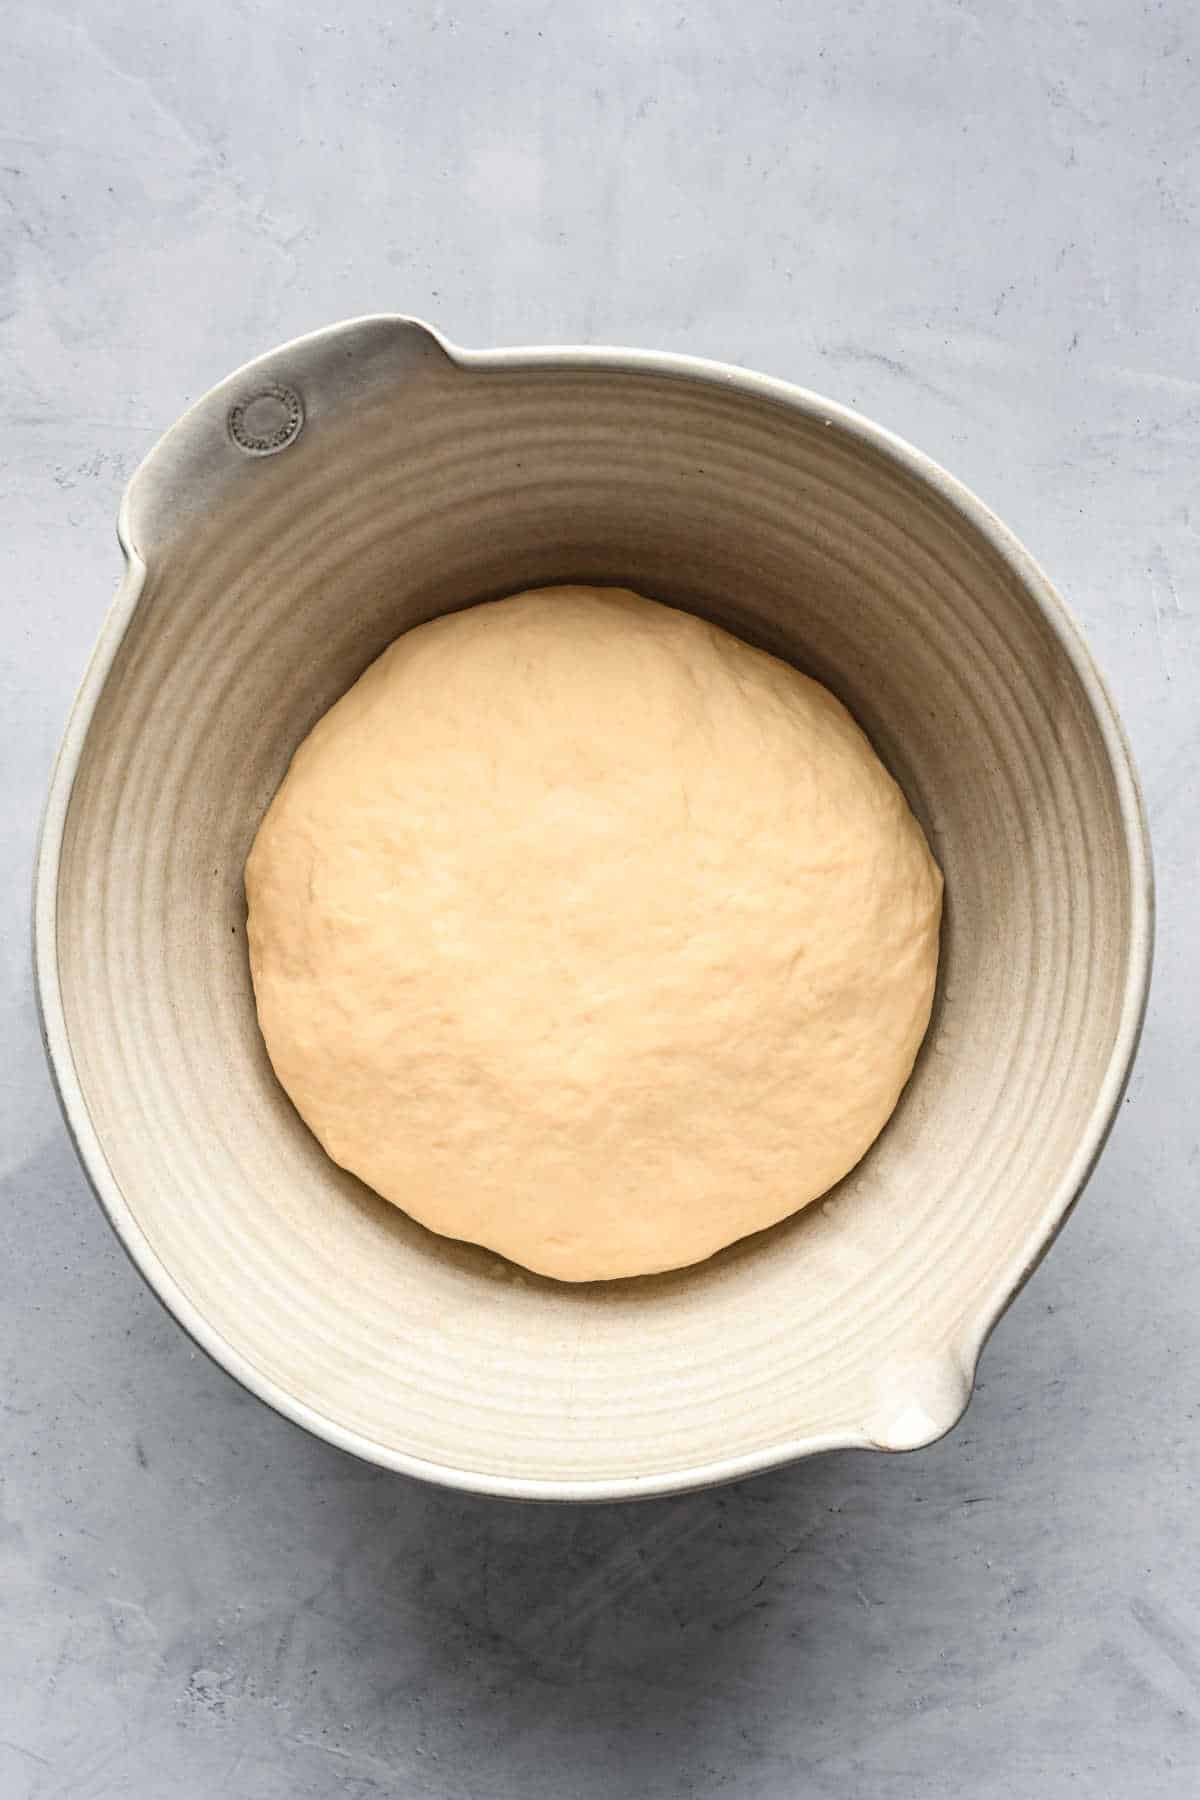 A ball of white bread dough in a ceramic mixing bowl. 